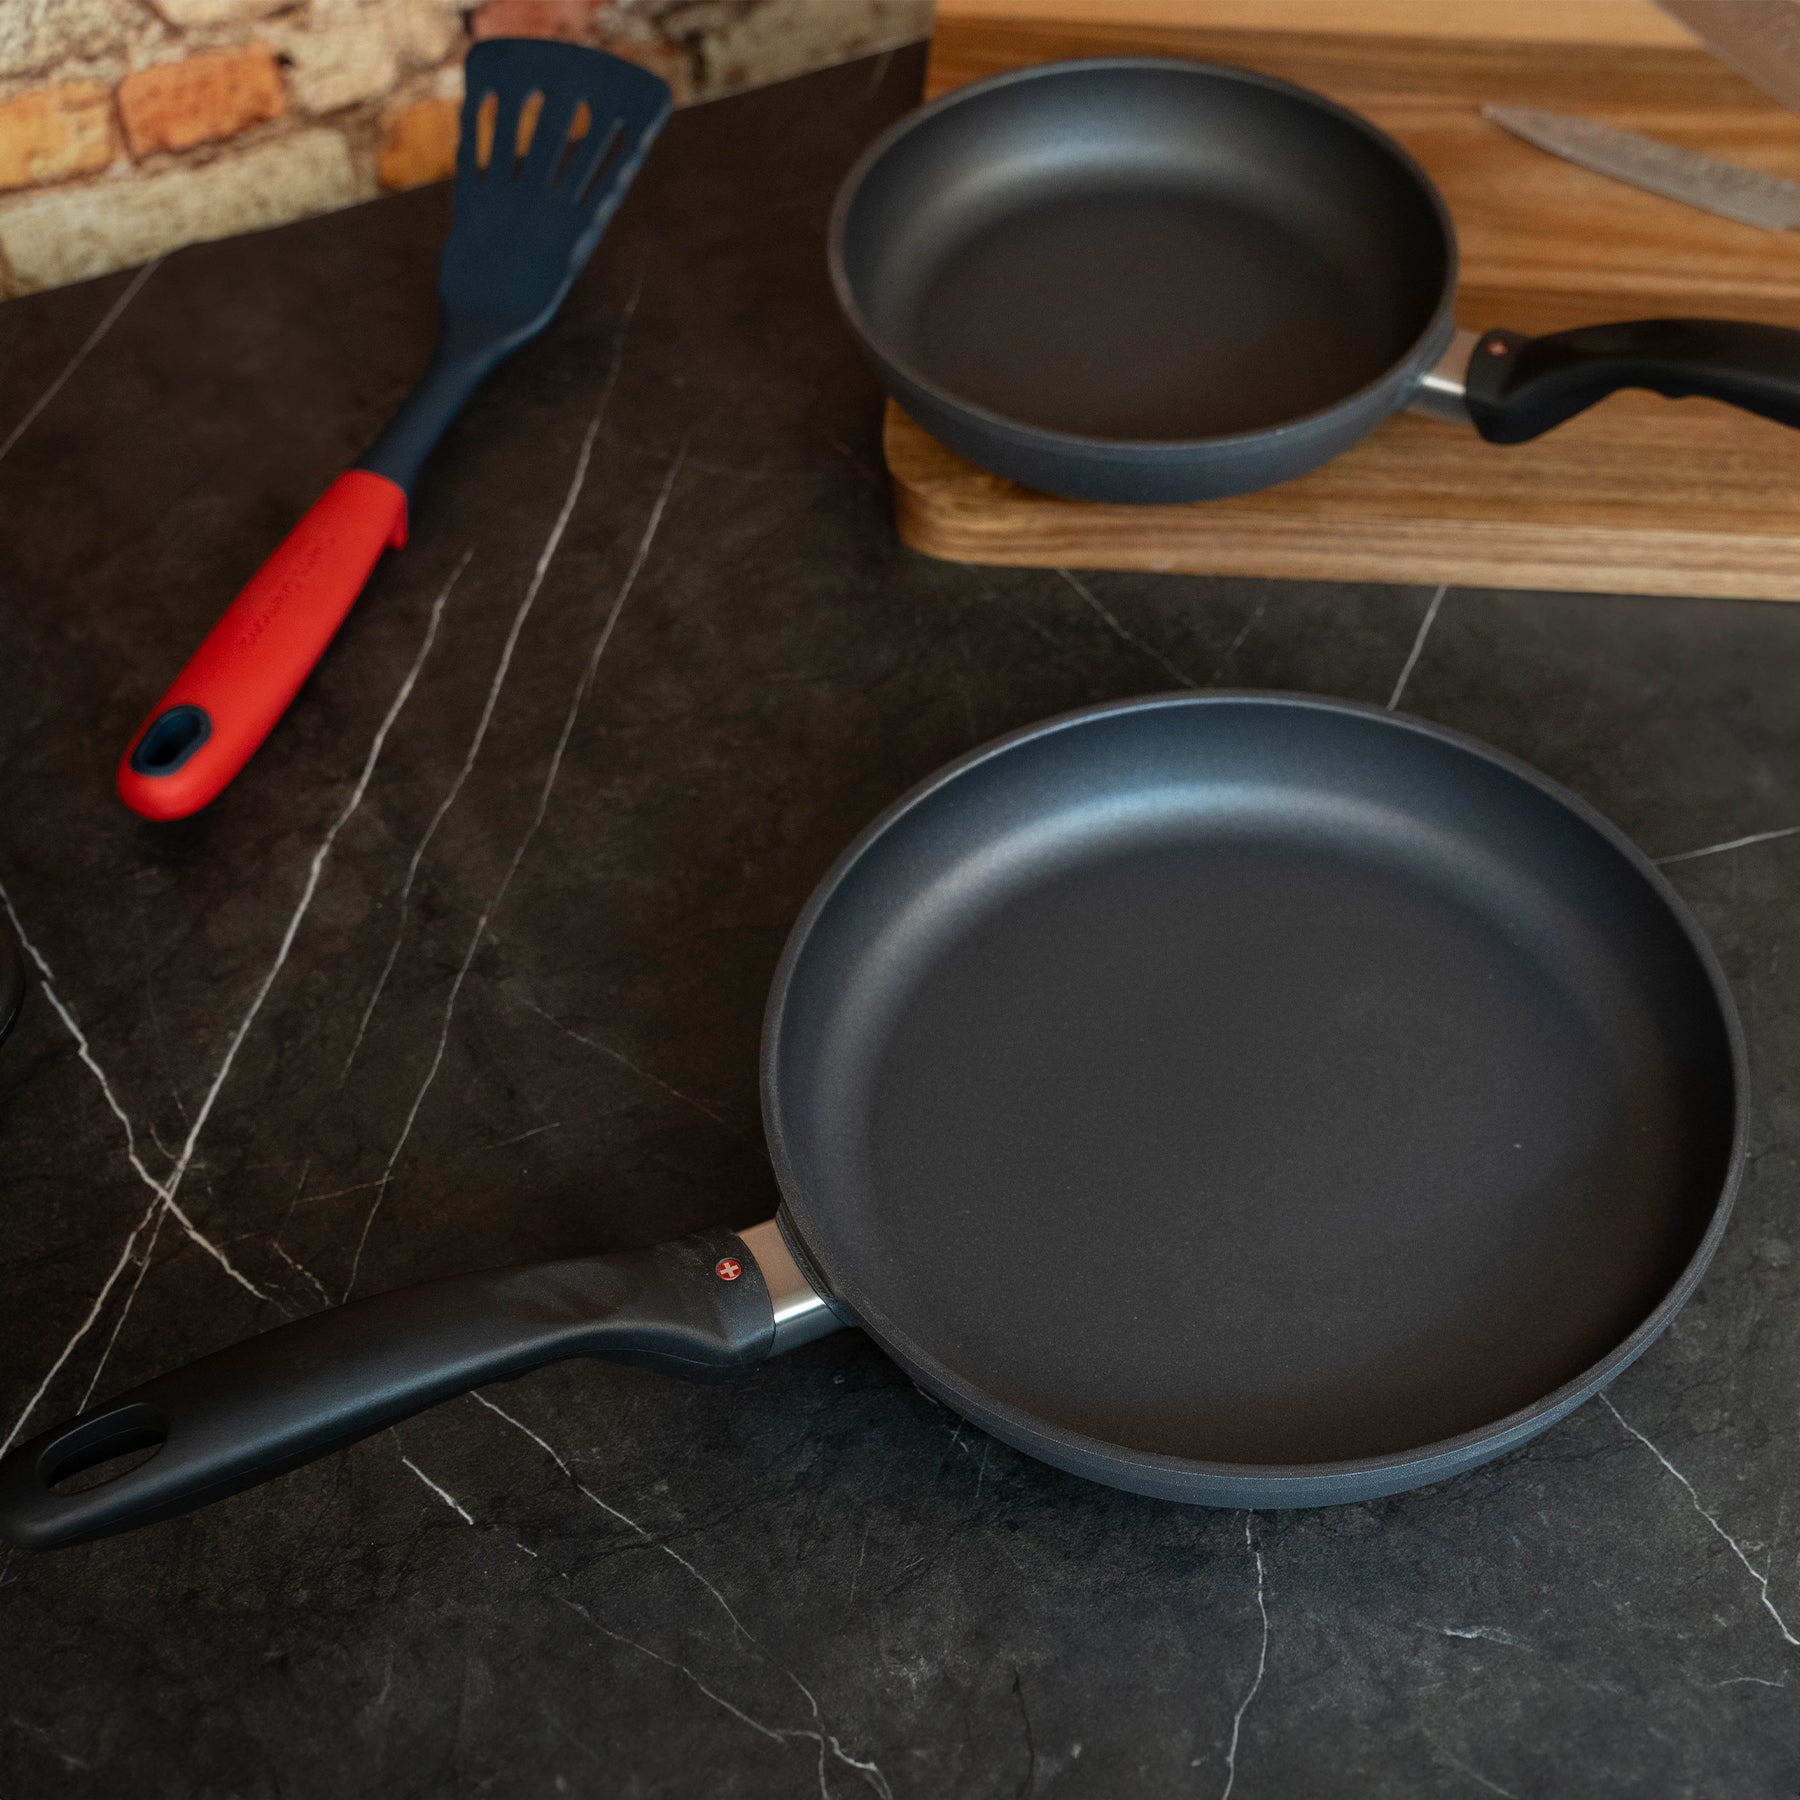 HD Nonstick 2-Piece Fry Pan Set - Induction in use on black granite kitchen counter